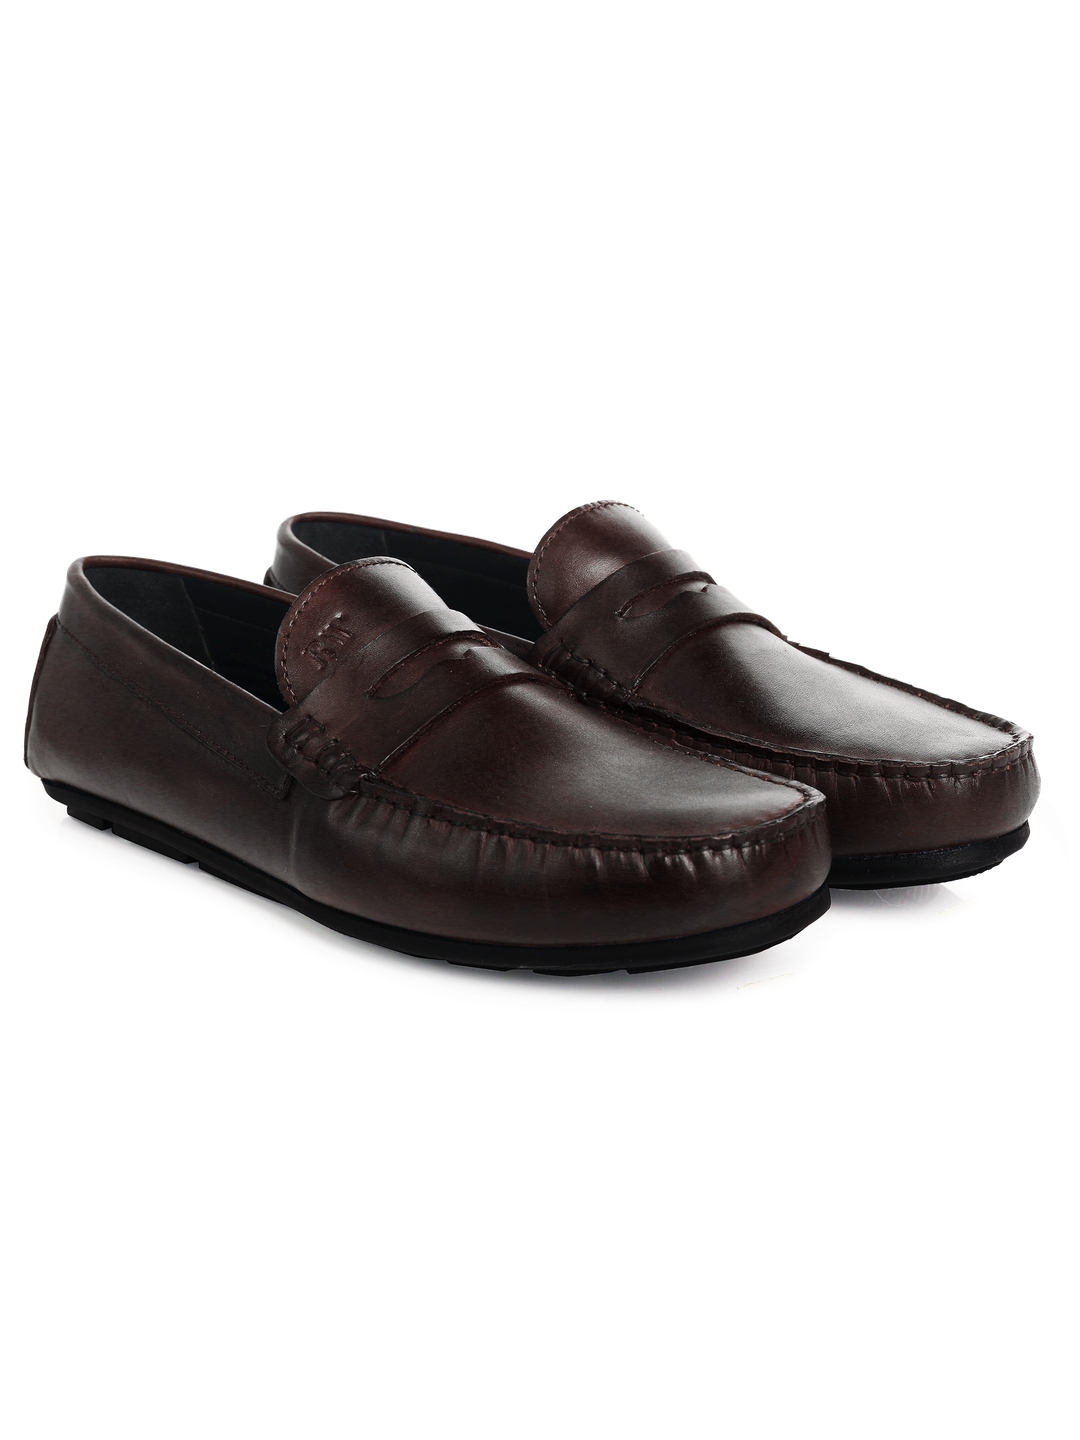 Brown Penny Loafer Moccasins Leather Shoes leather shoes for men | Rapawalk